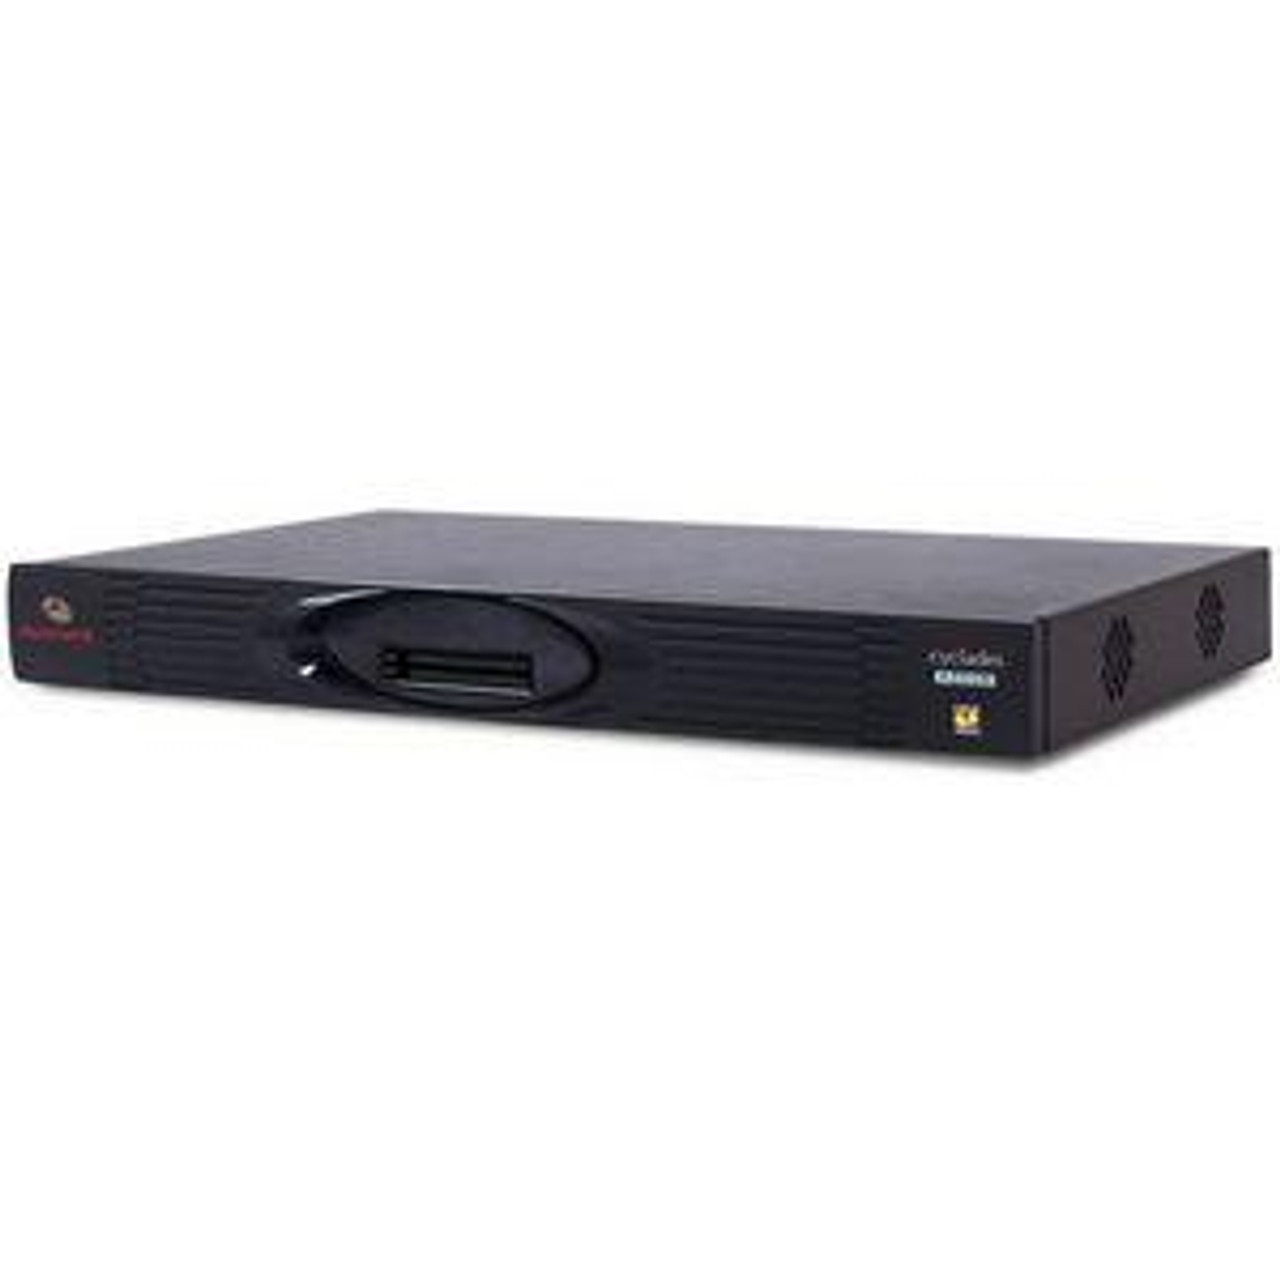 ATP0155 Avocent Cyclades 32-Ports Alterpath ACS-32 Console Server with Dual DC Power Supply